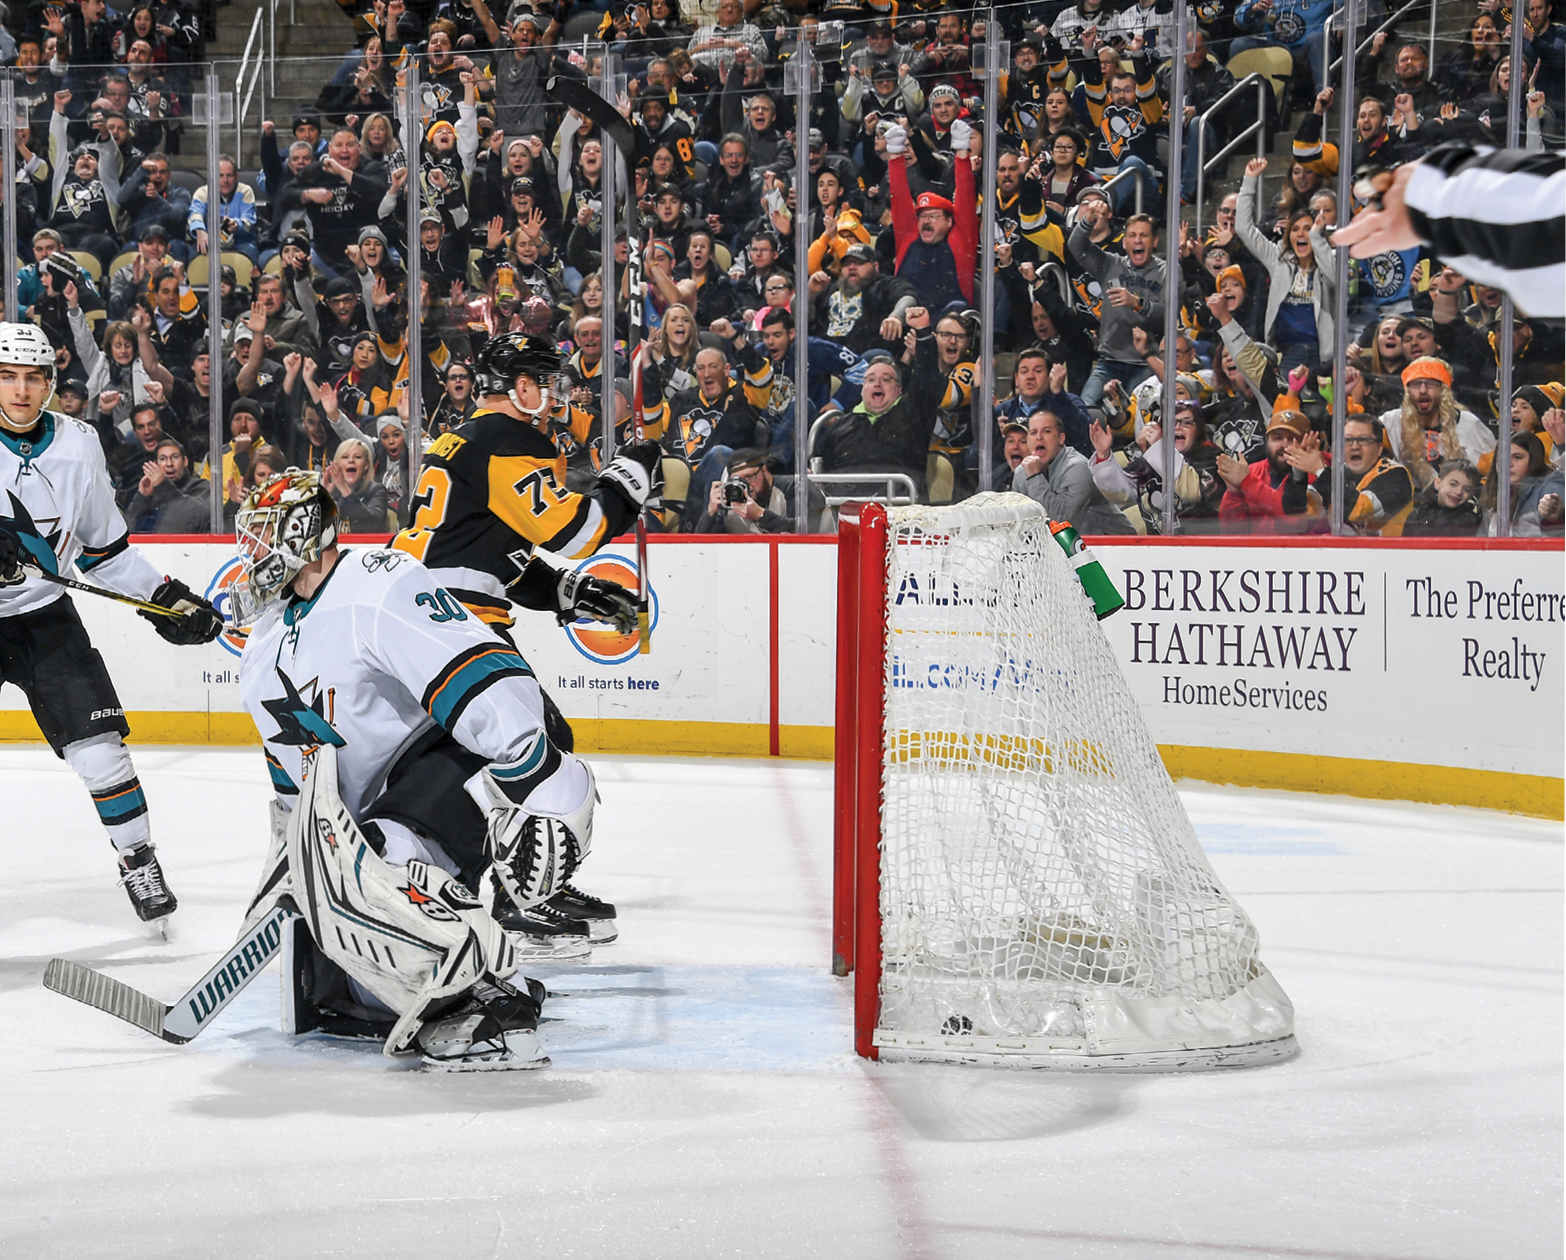 January 2, 2020 - Pittsburgh Penguins vs San Jose Sharks at PPG Paints Arena  San Jose won the game 3-2 in overtime 